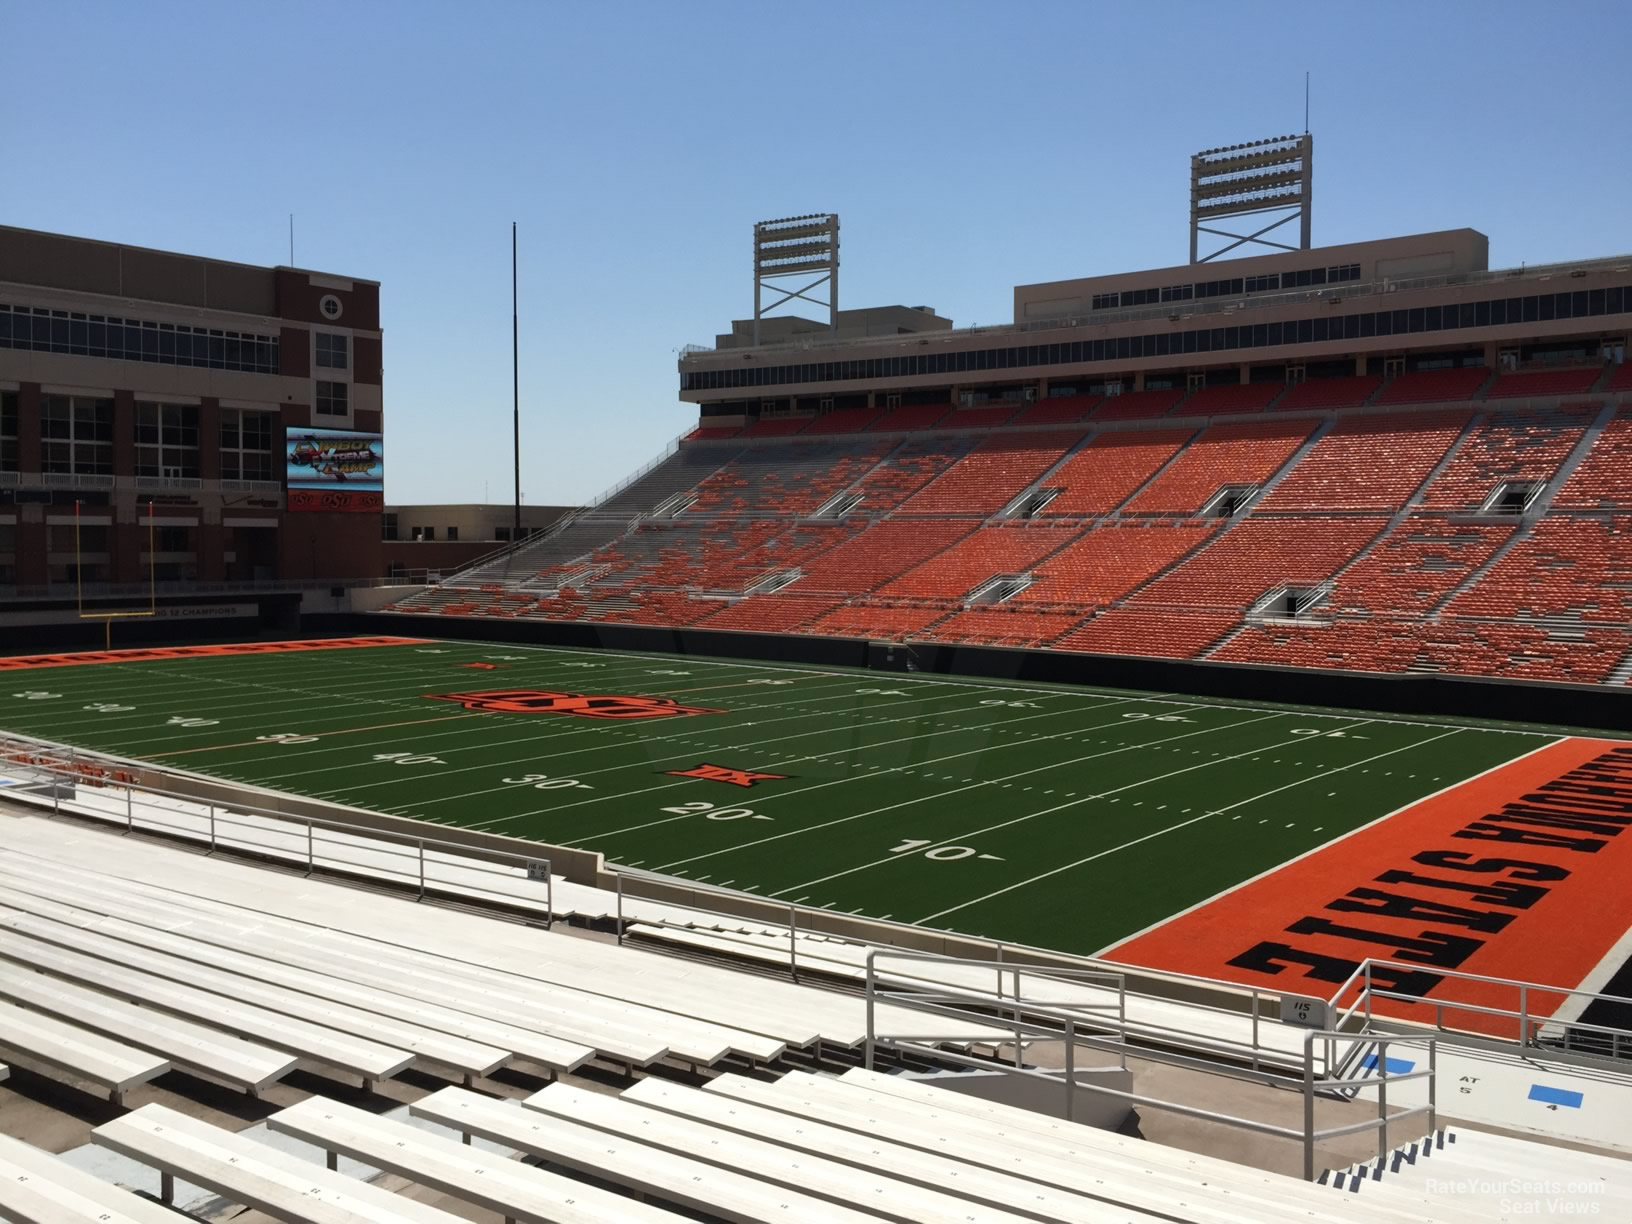 section 222, row 20 seat view  - boone pickens stadium